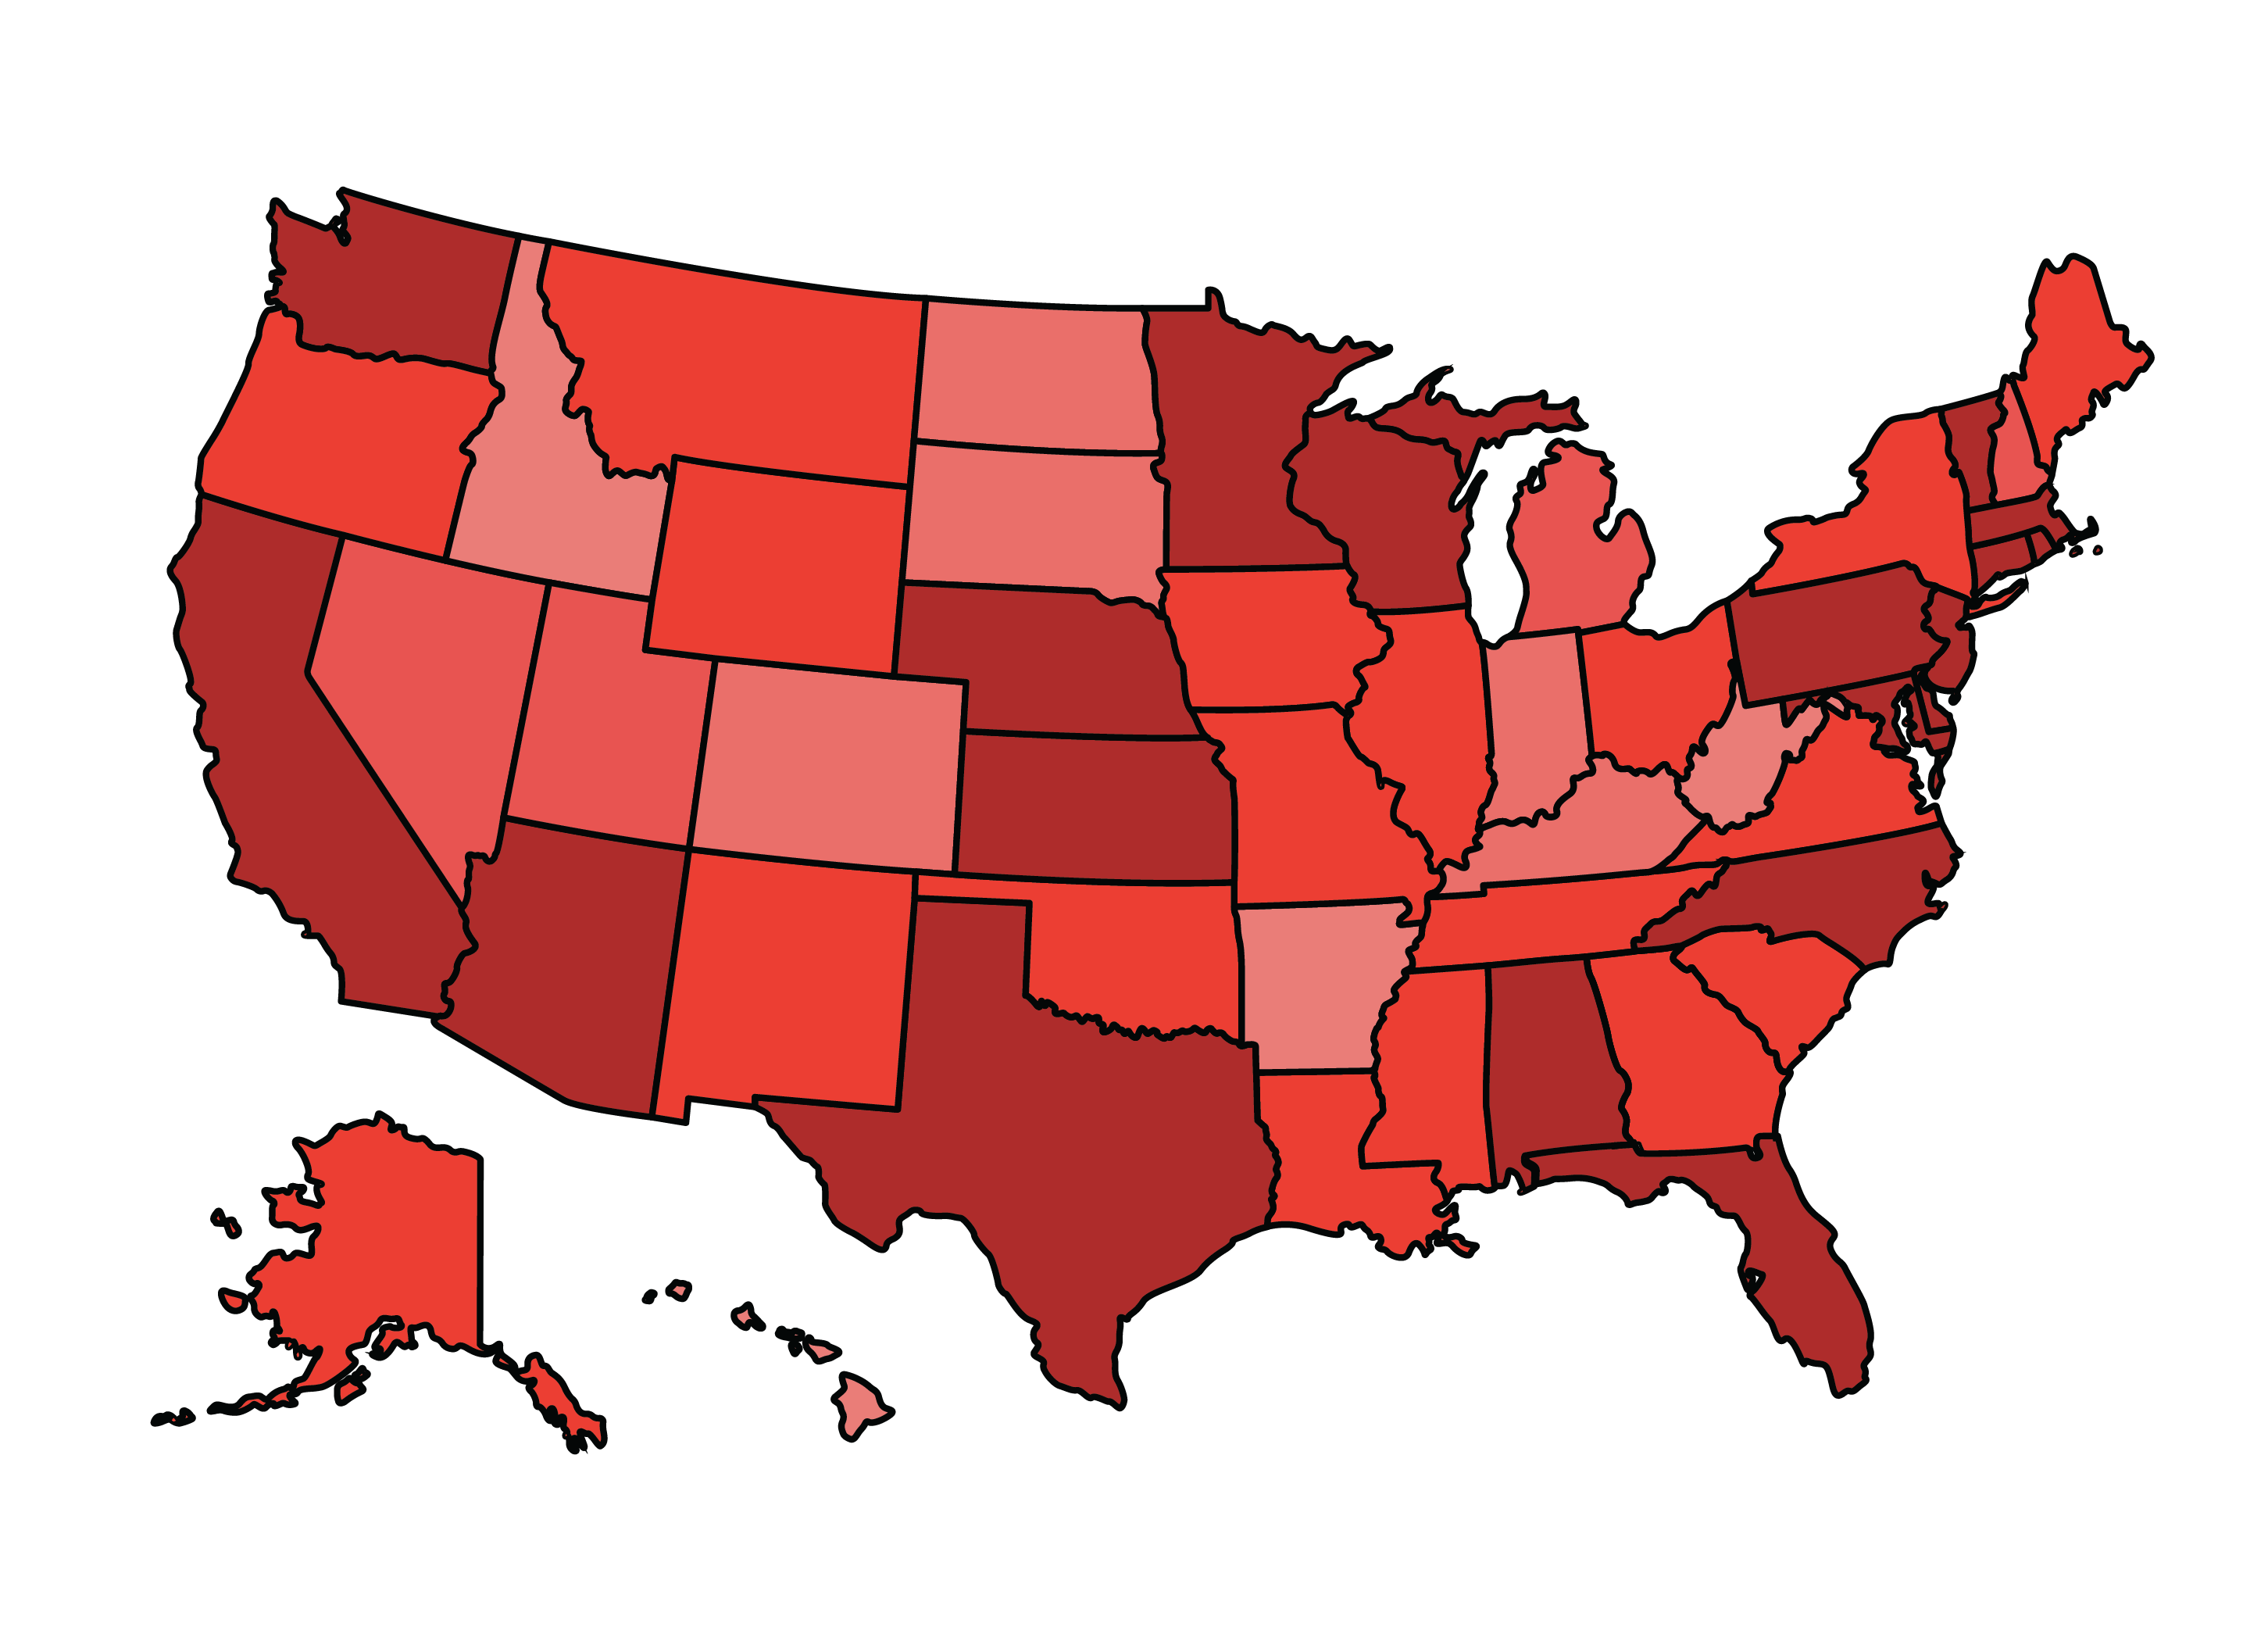 Red outlined map of United States including clients